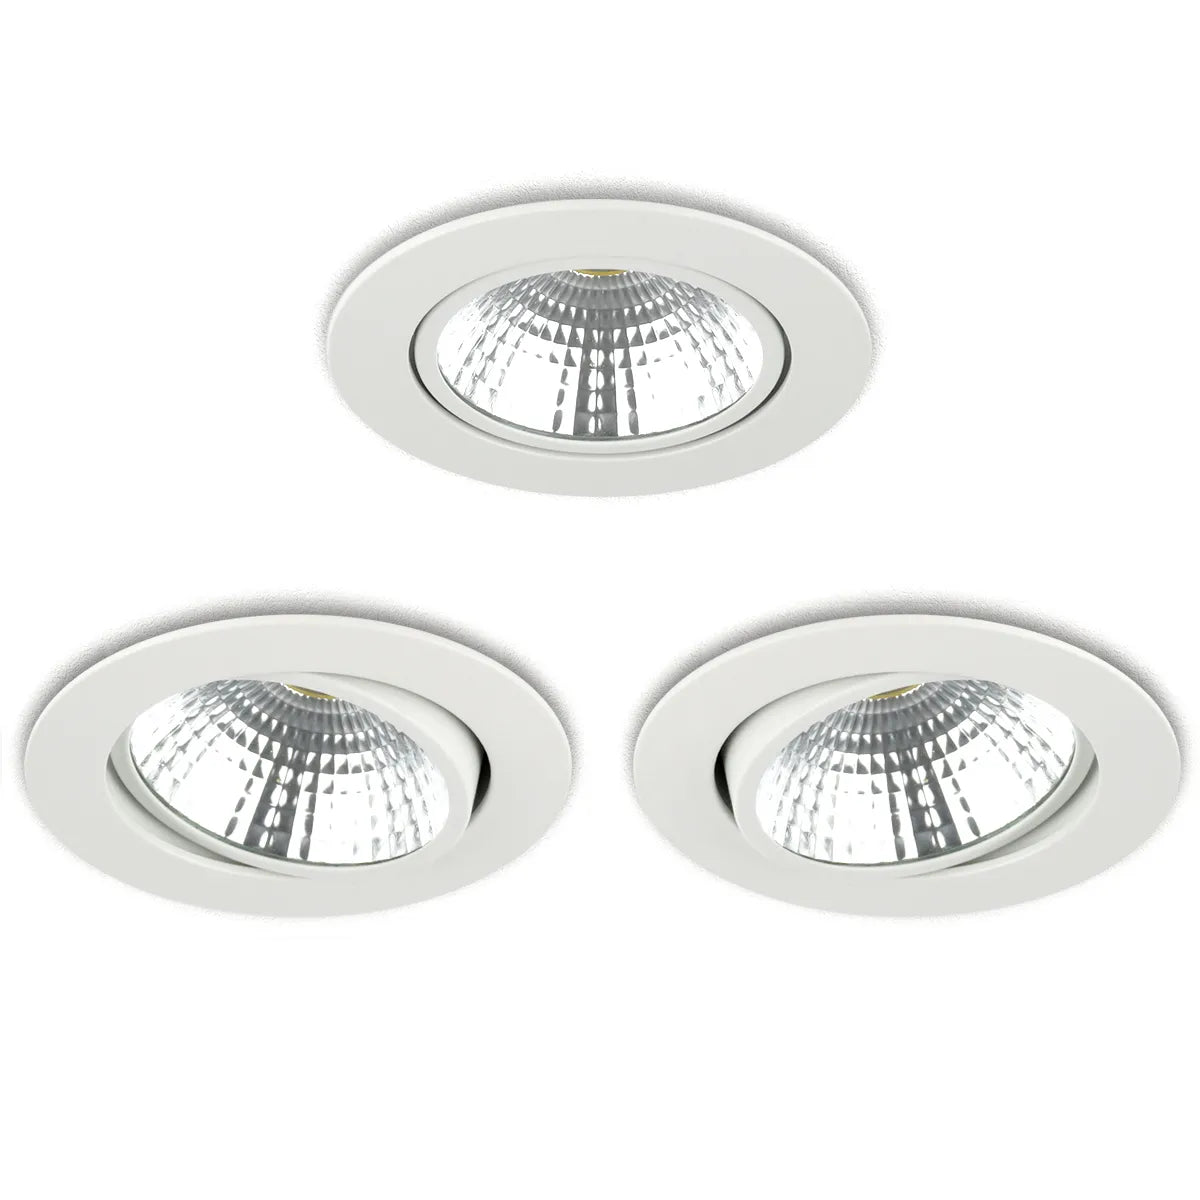 LED Recessed Spotlight 7W ⌀110mm dimmable tiltable